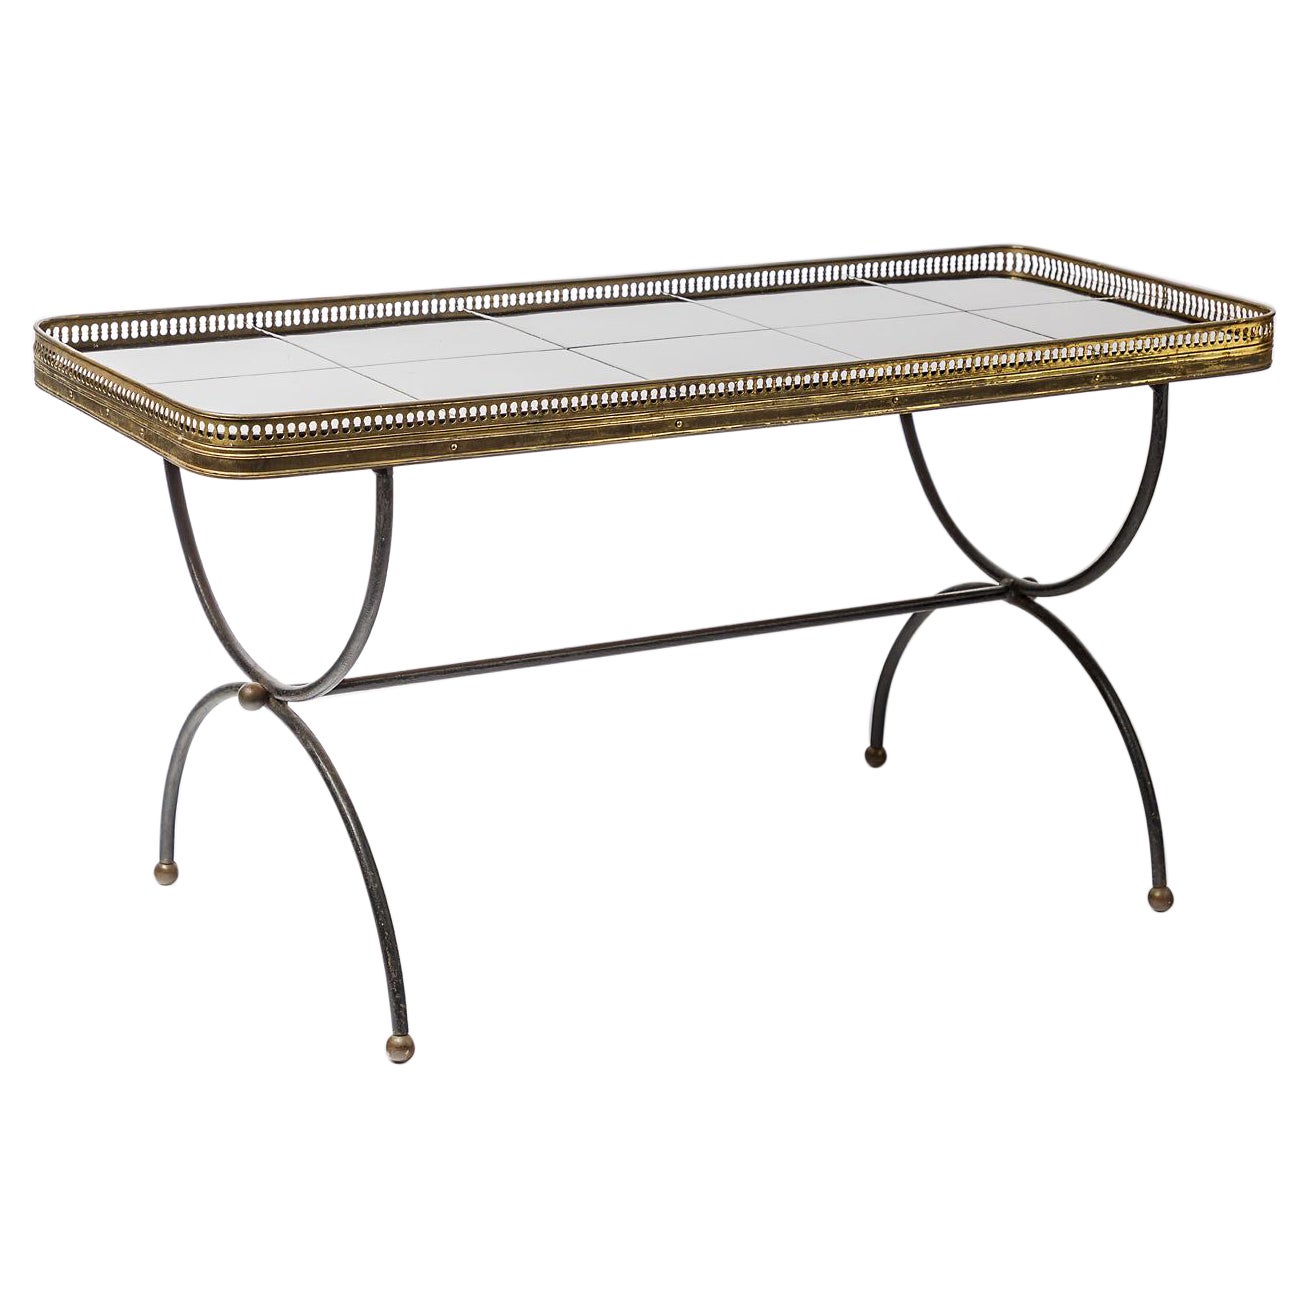 Black Ceramic and Metal Low Coffee Table by Maison Jansen French Decoration